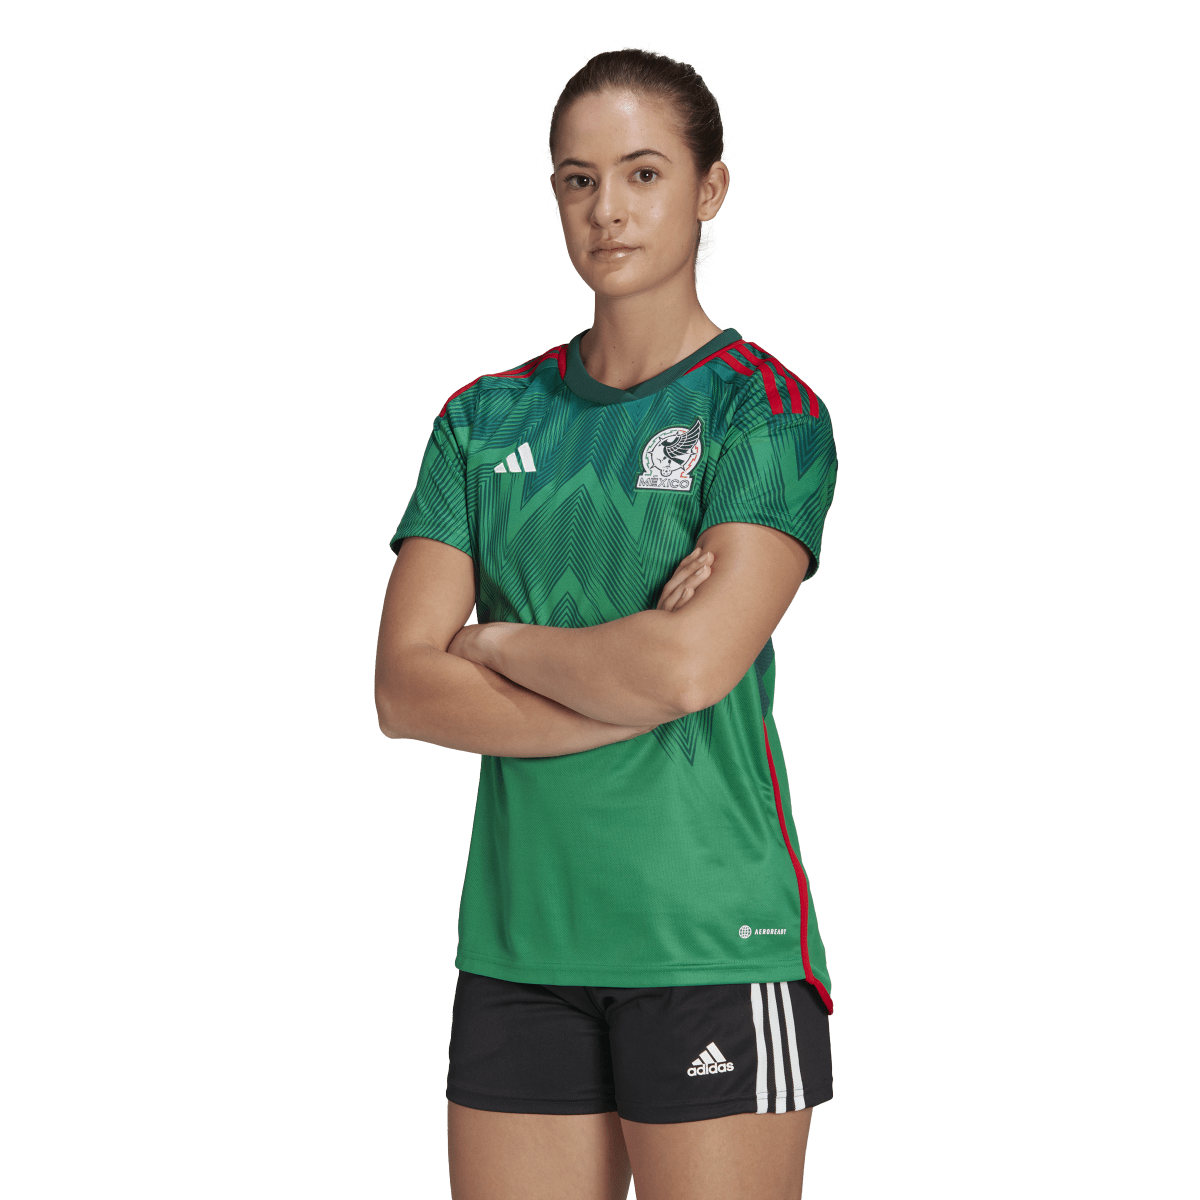 adidas mexico jersey world cup